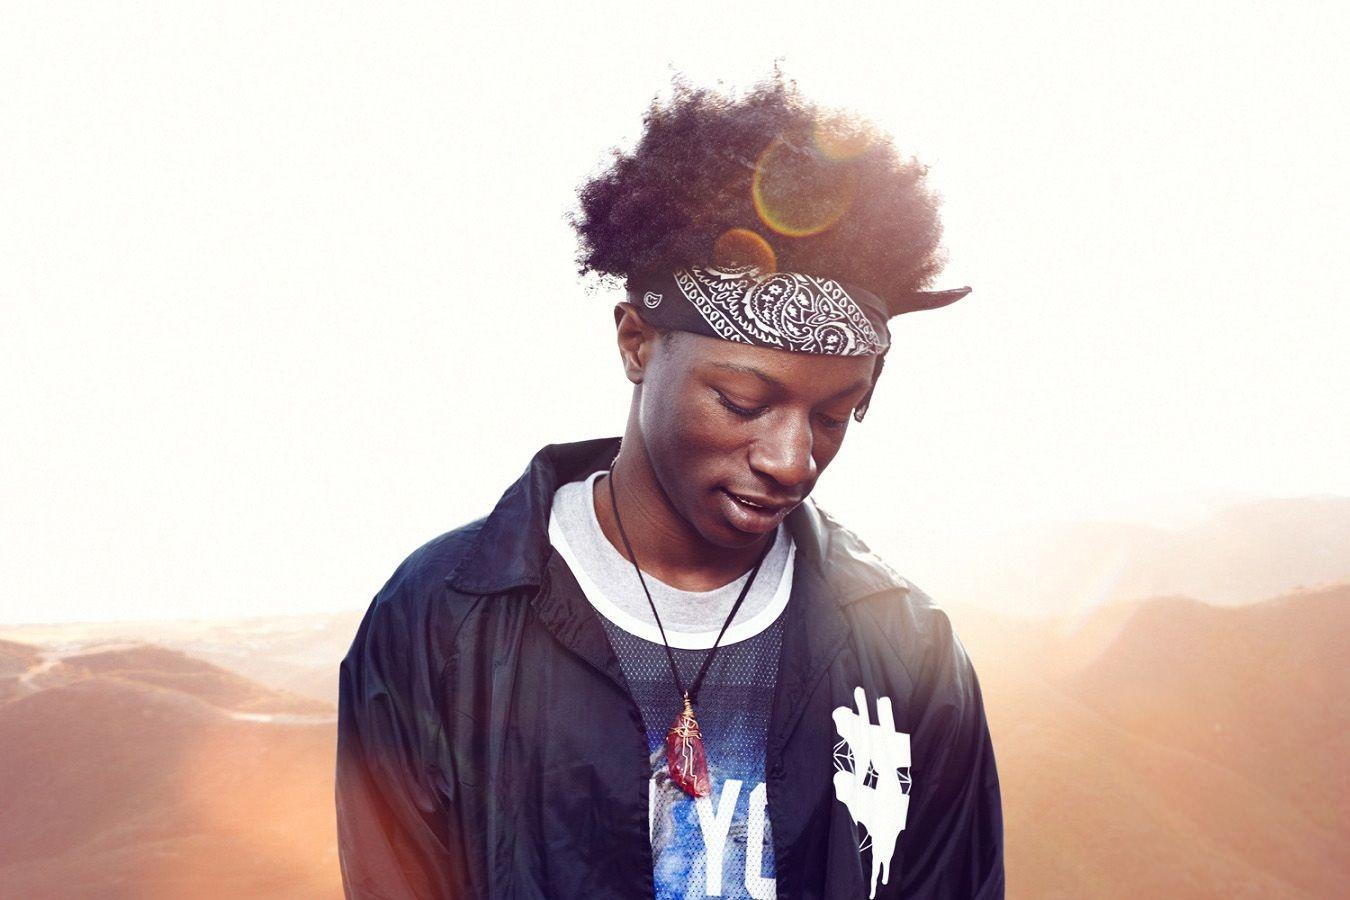 Joey Bada$$ Calls Out Rich Homie Quan For Messing Up Biggie's